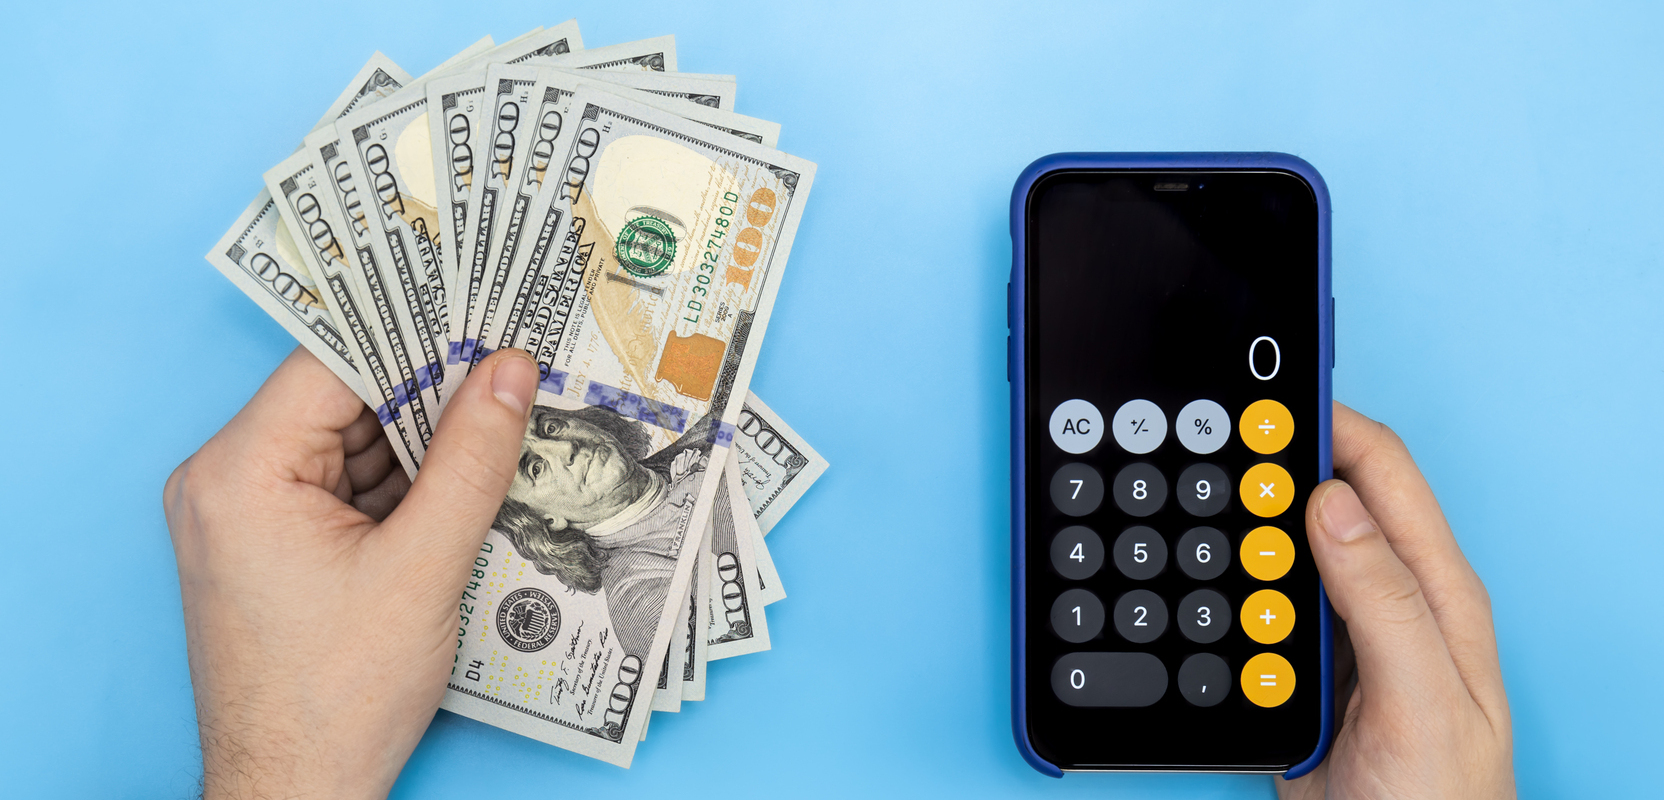 Money and a calculator in a smartphone in male hands on a blue background, top view